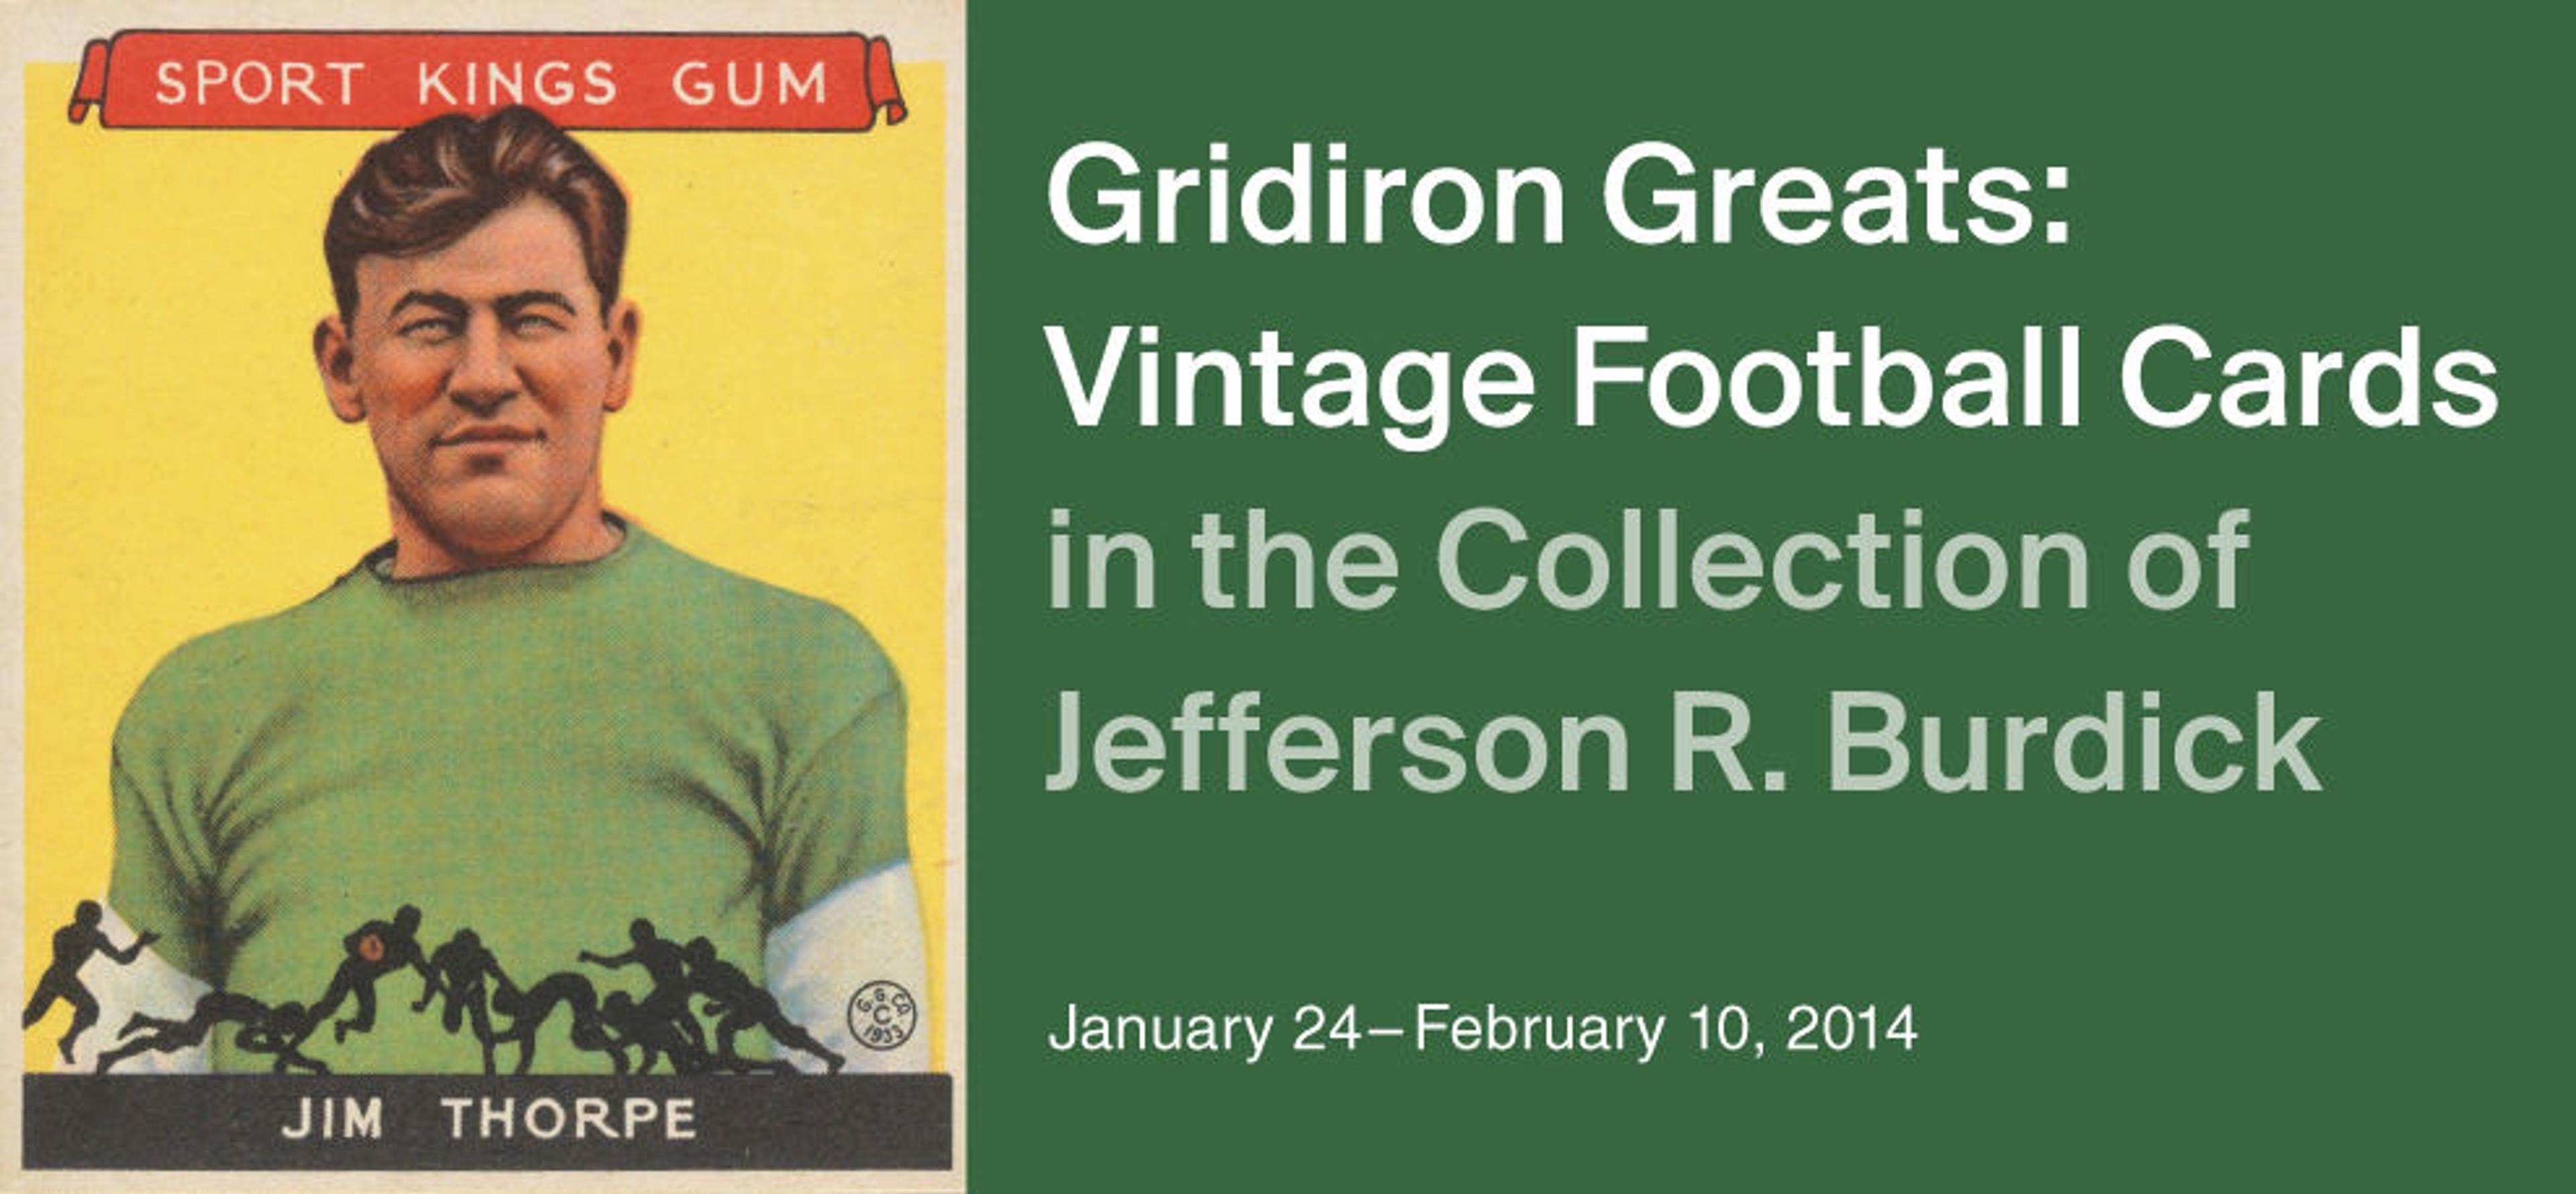 Gridiron Greats: Vintage Football Cards in the Collection of Jefferson R. Burdick